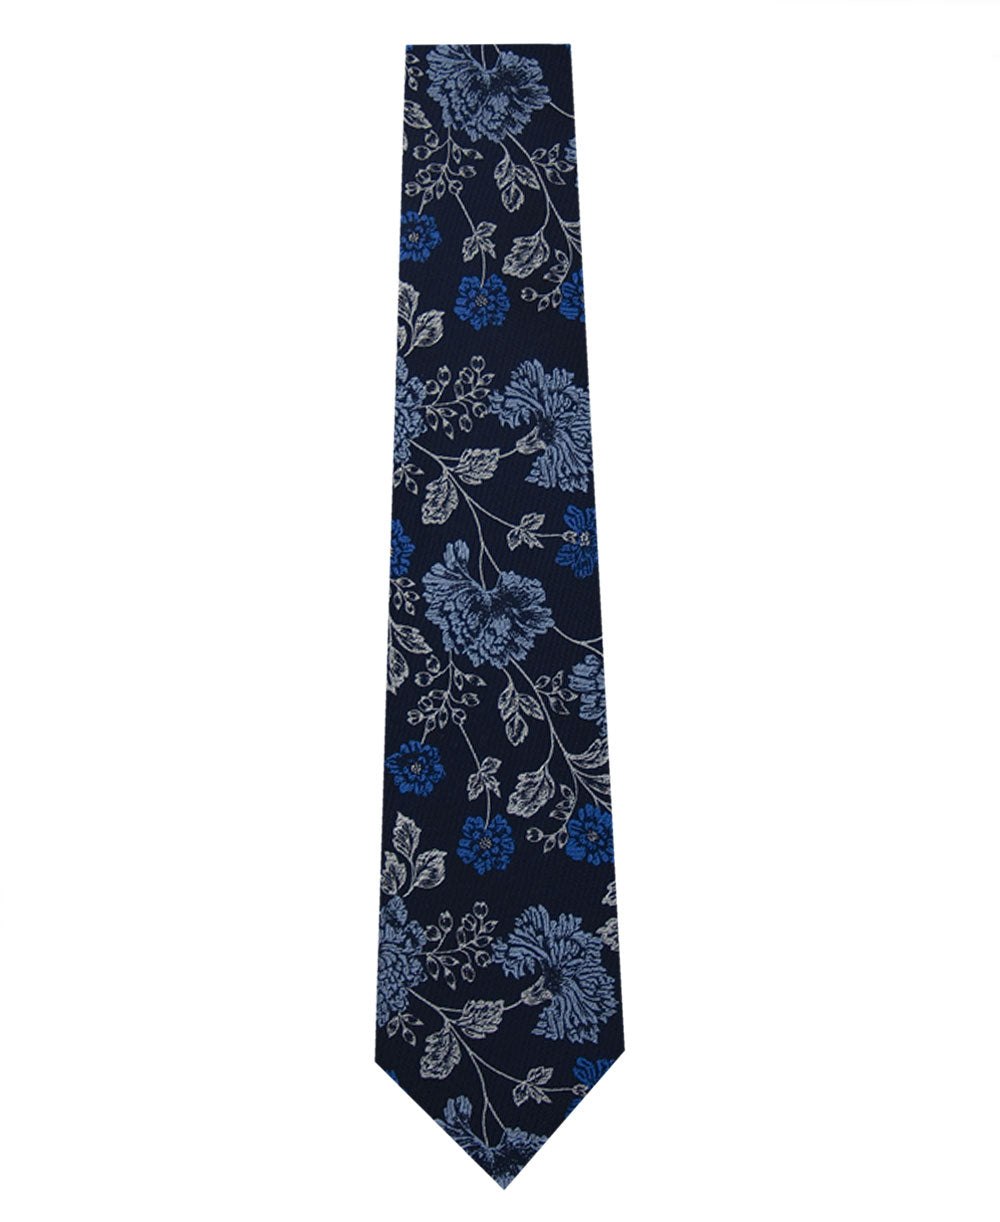 Navy and Floral Design Silk Tie Long